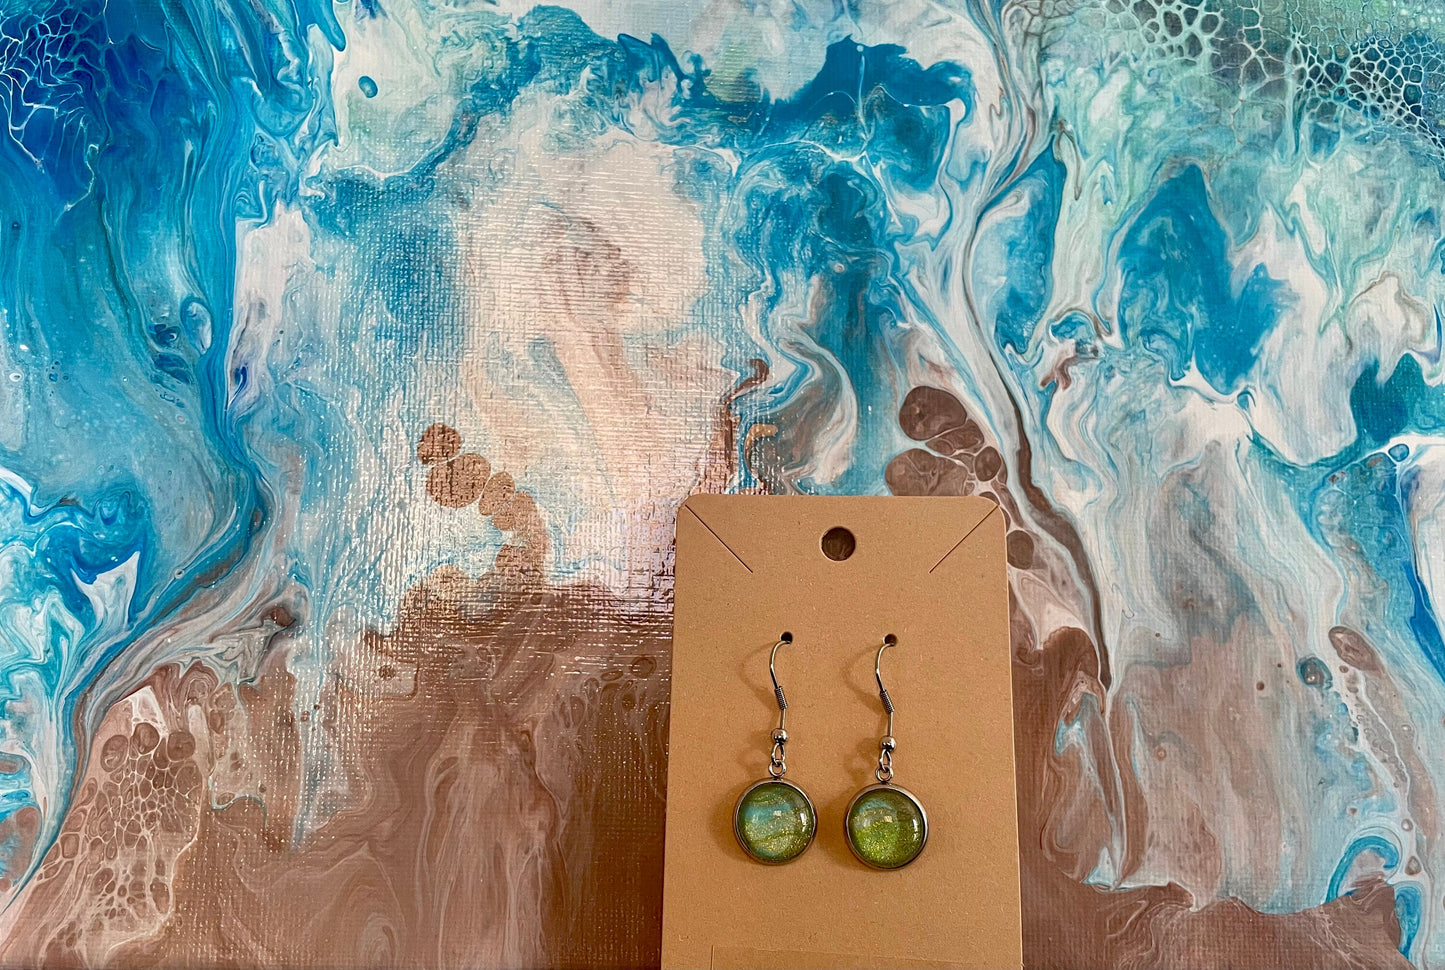 Green and Gold Dangle Earrings Hand Painted in Abstract Acrylic Pour Style